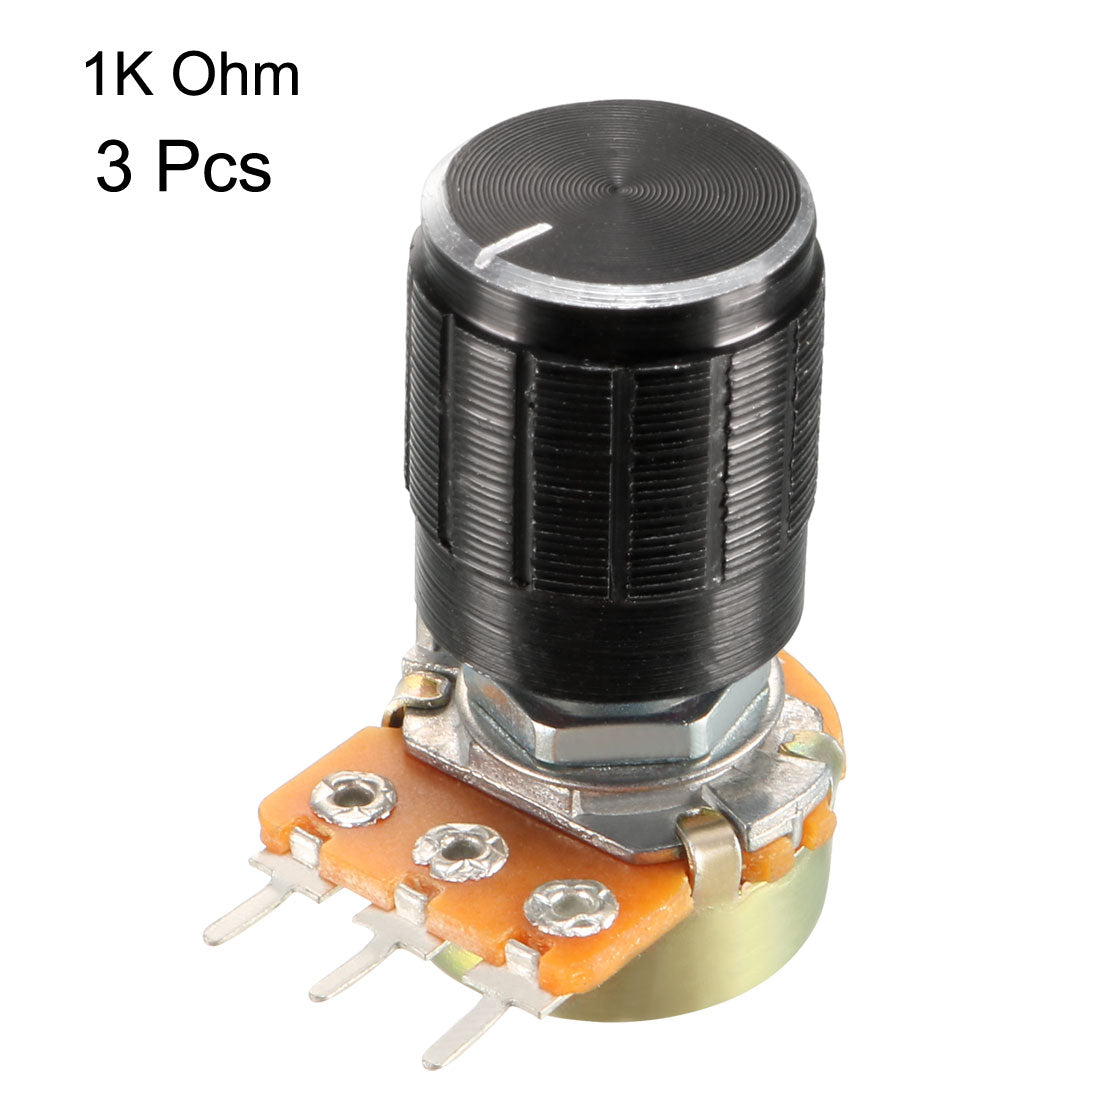 uxcell Uxcell WH148 3Pcs 1K Ohm Variable Resistors Single Turn Rotary Carbon Film Taper Potentiometer with Knob